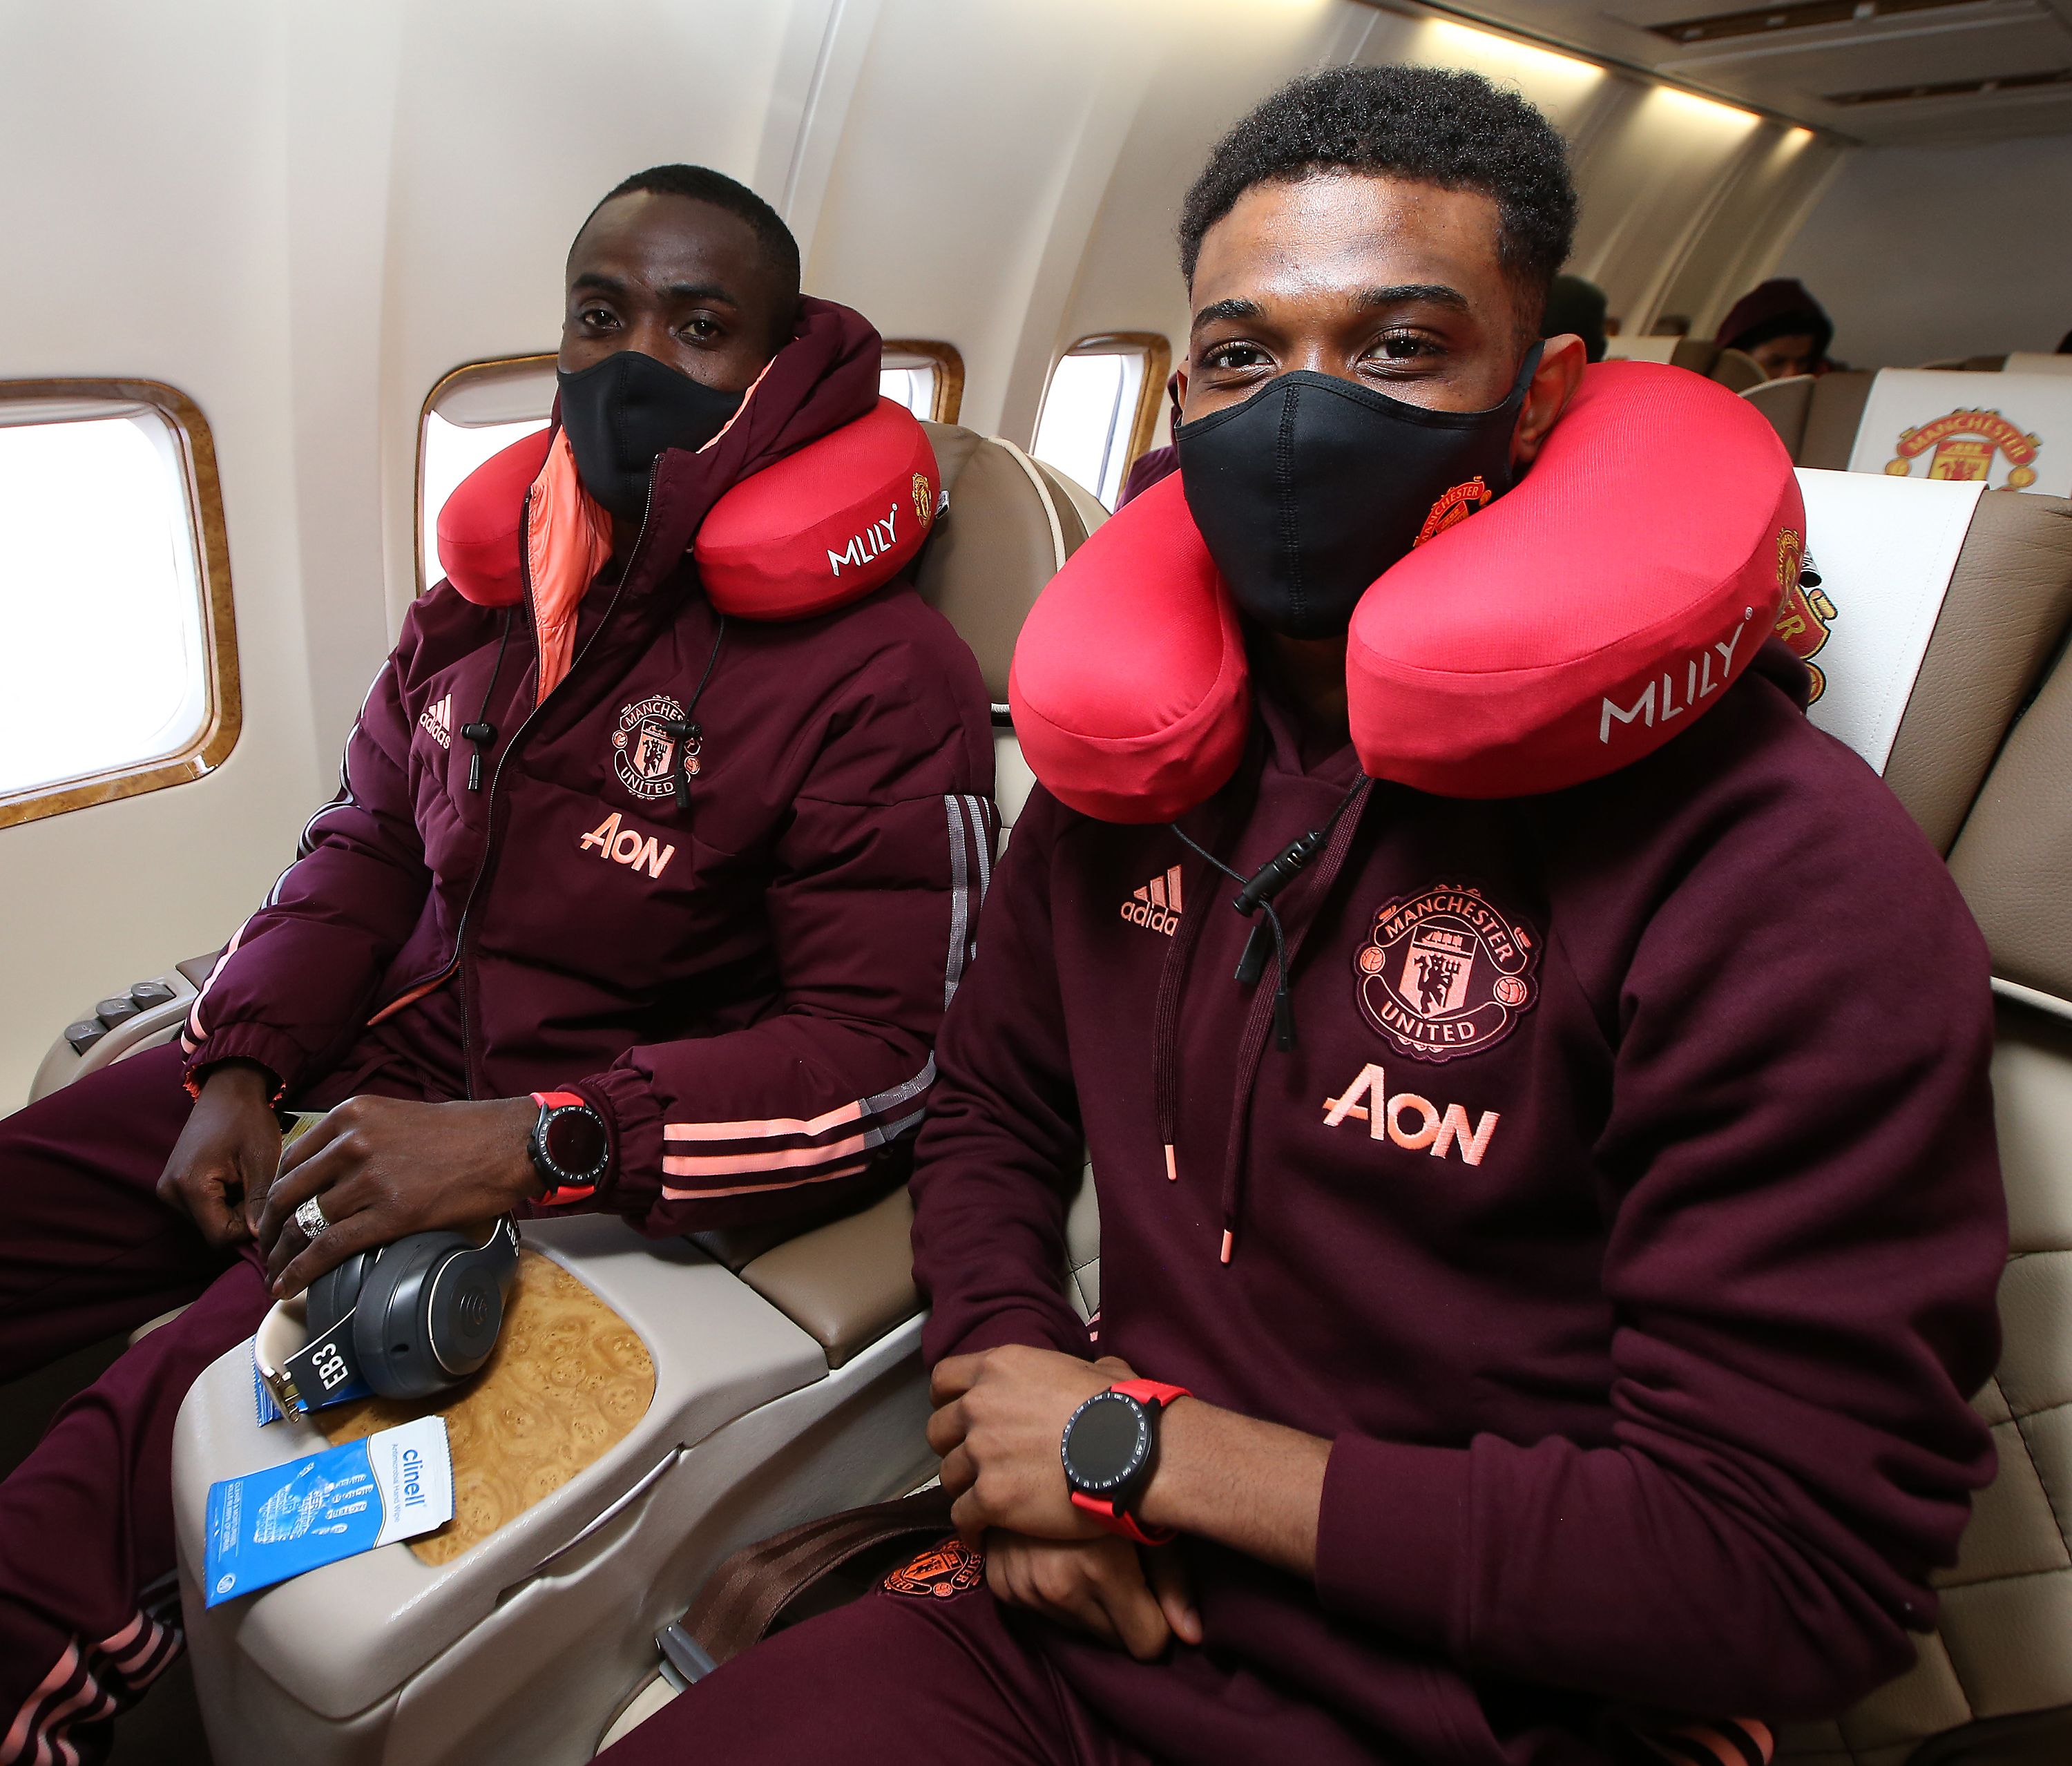 Manchester United players in seats